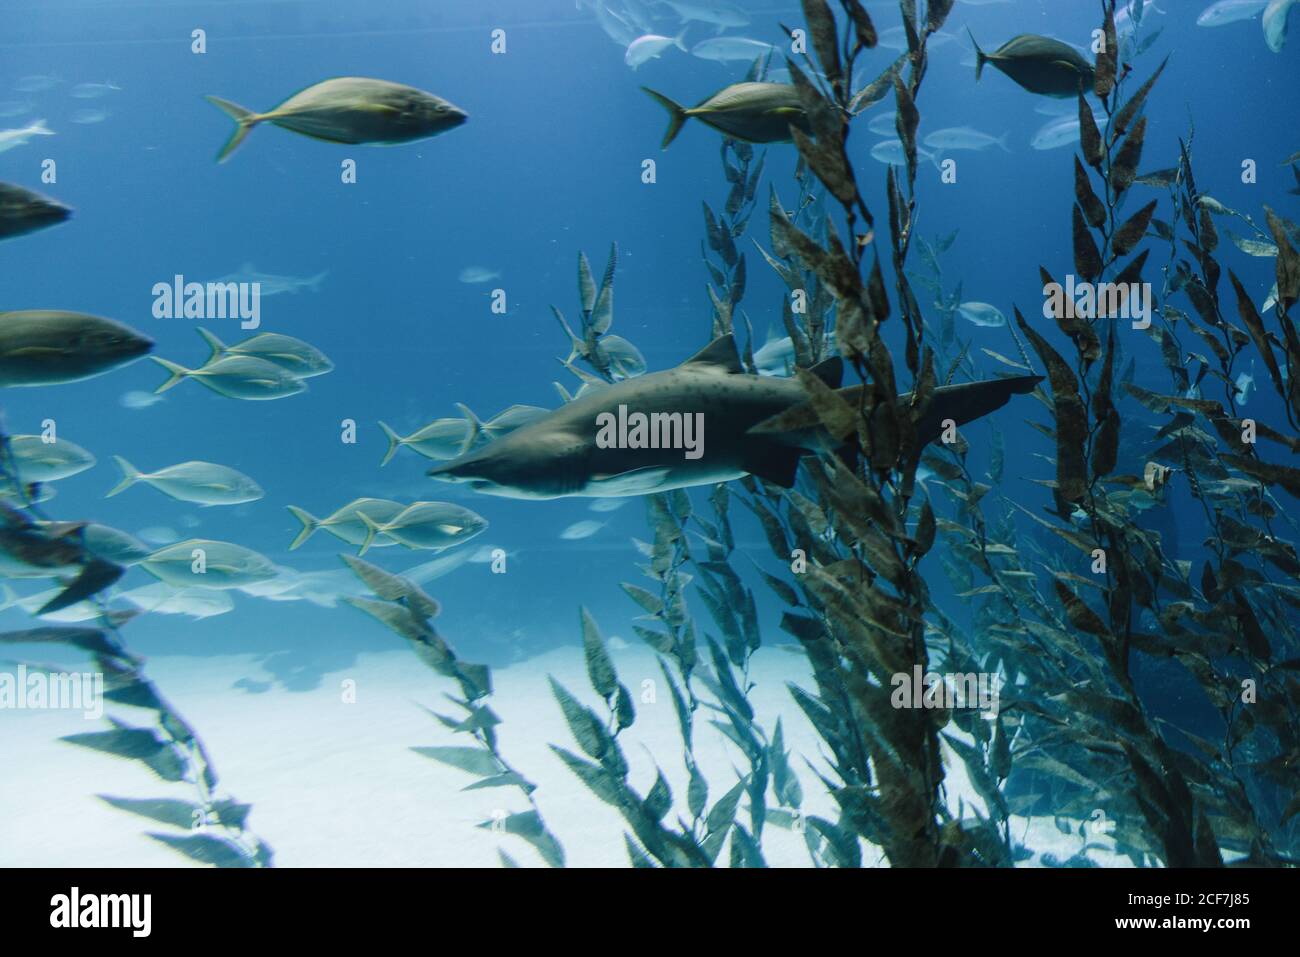 Big black shark among tall green seaweed and flocks of small fishes under blue water Stock Photo